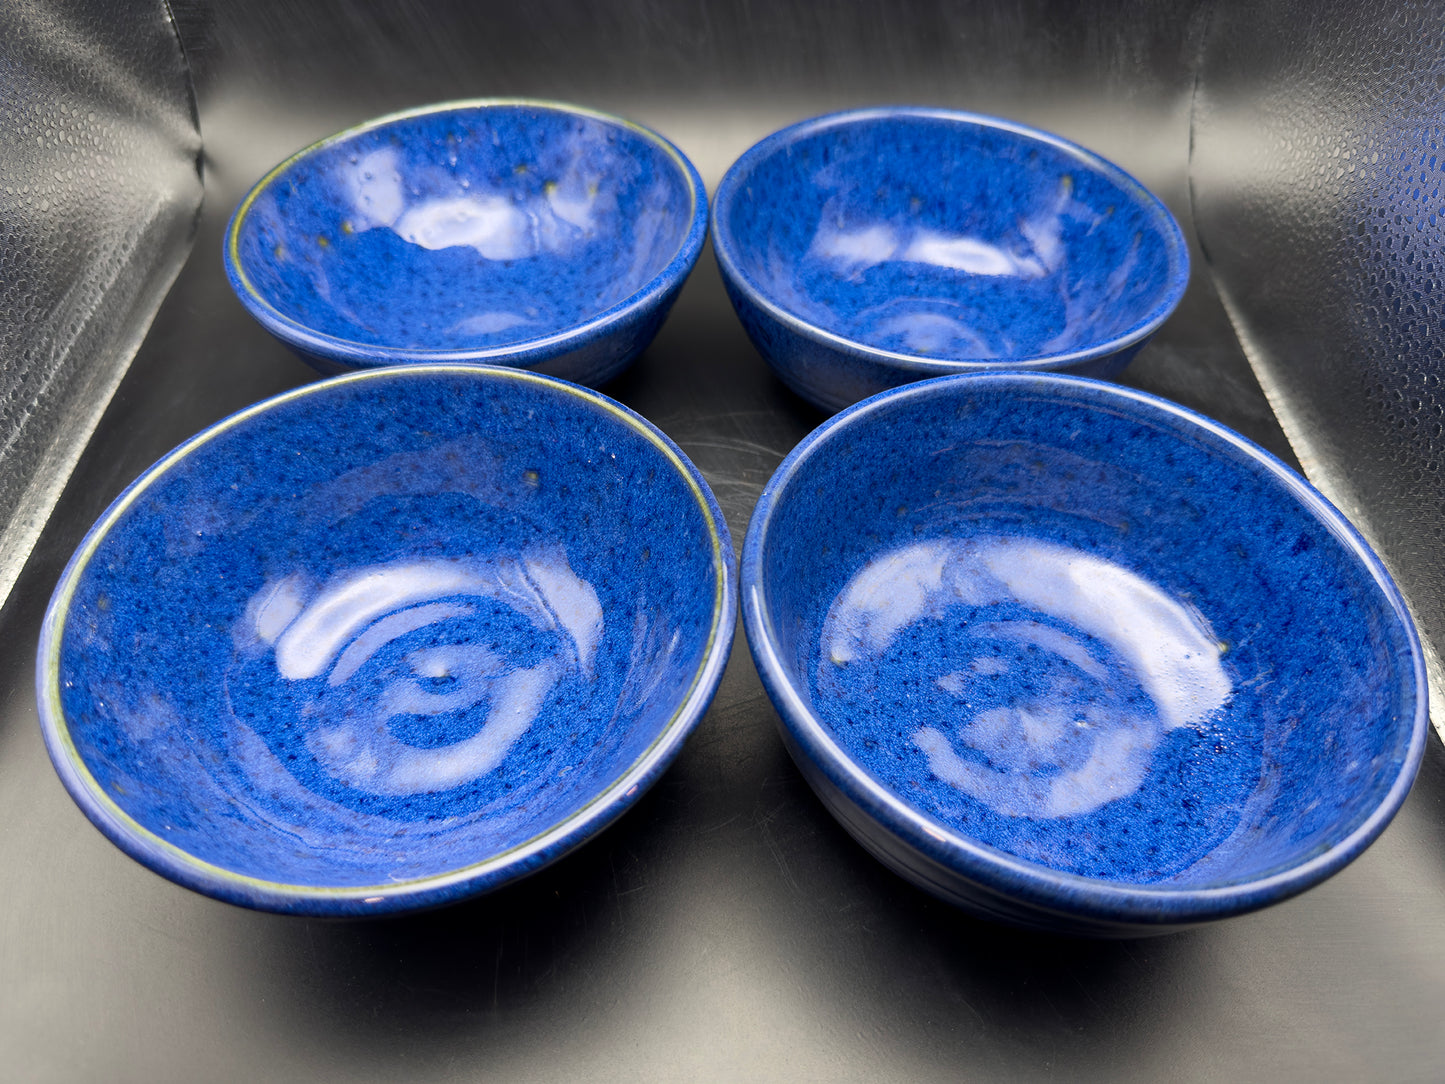 Cereal Bowl Set of 4 Stoneware